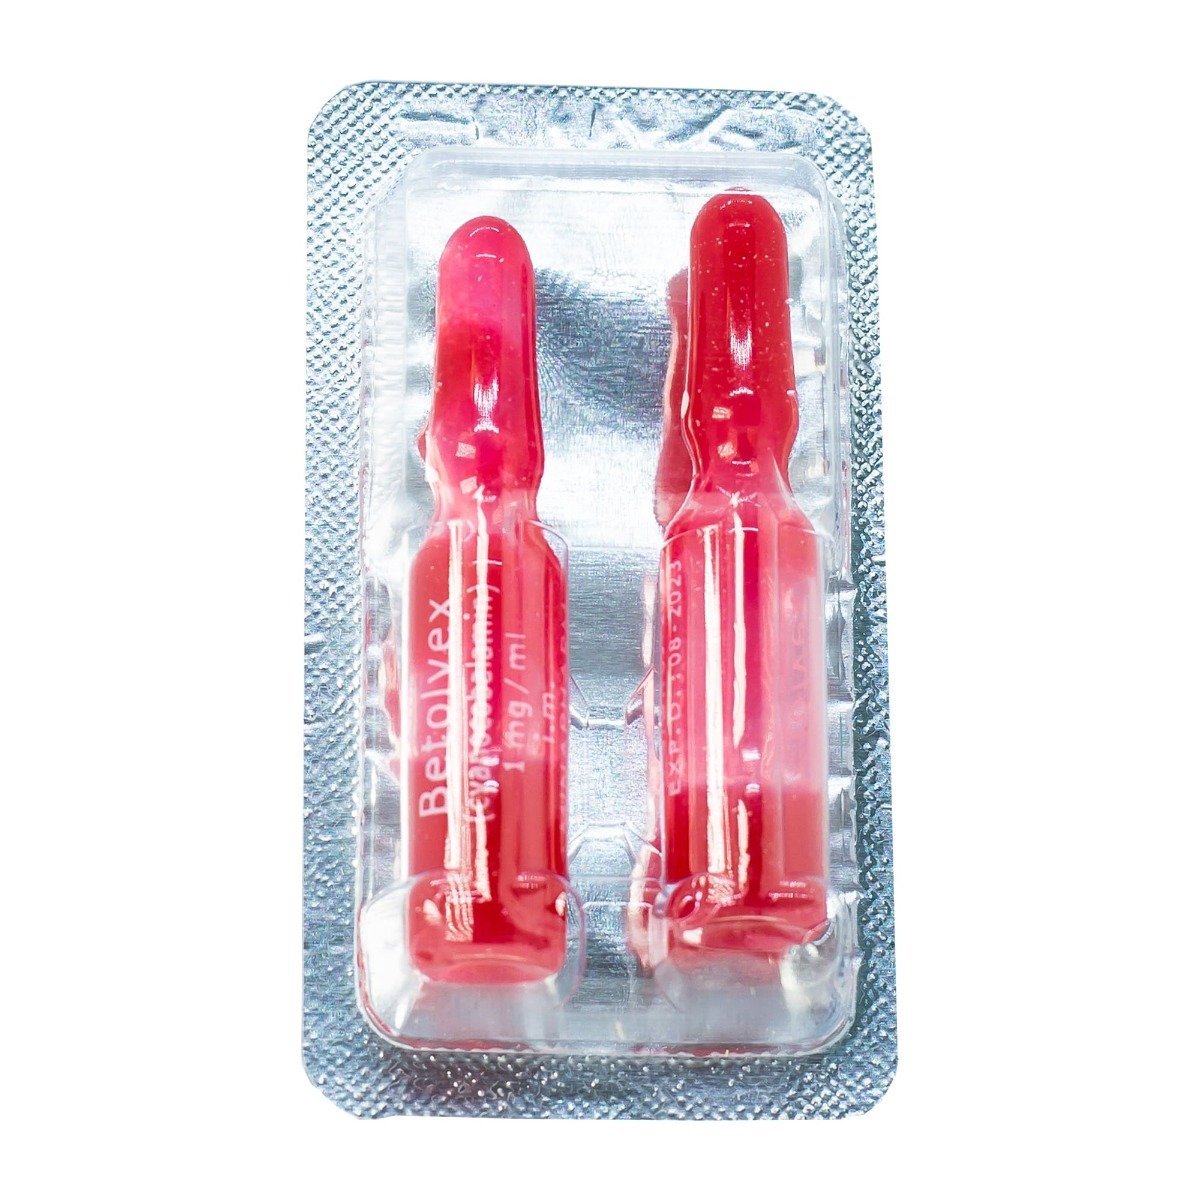 Betolvex 1 mg-1 ml - 2 Ampoules - Bloom Pharmacy